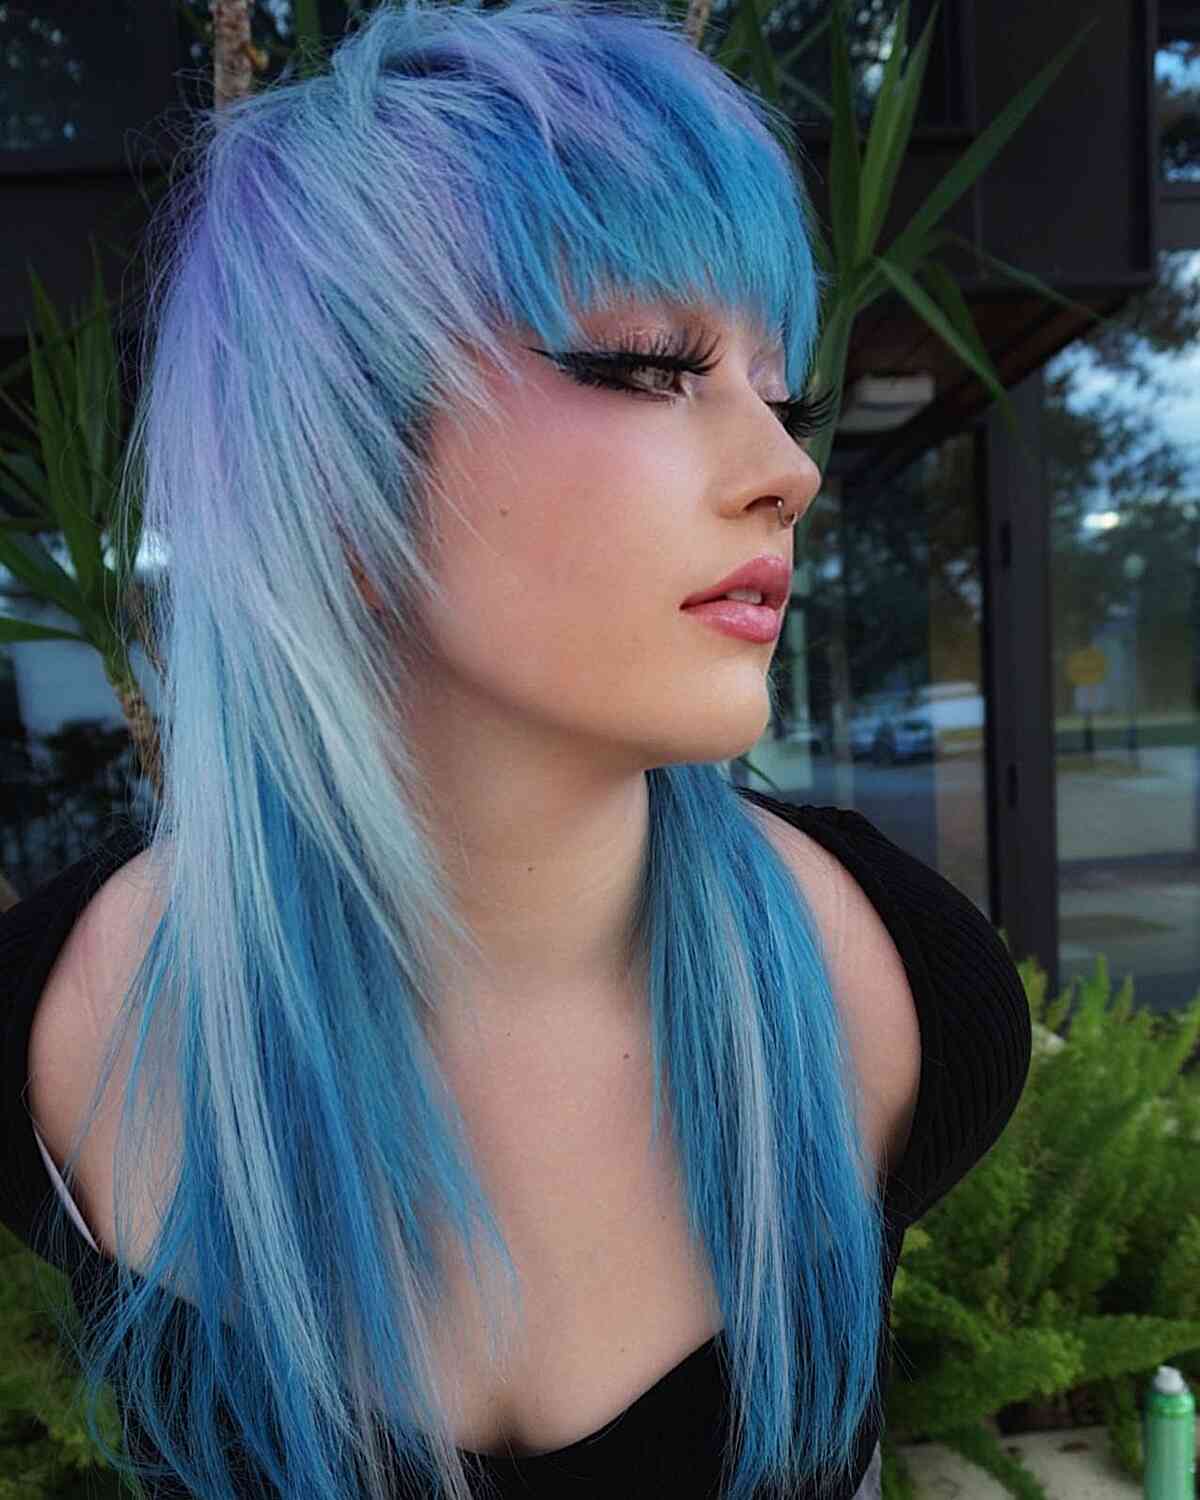 Baby Blue Hair with Light Purple Highlights on Long Straight Hair with Bangs